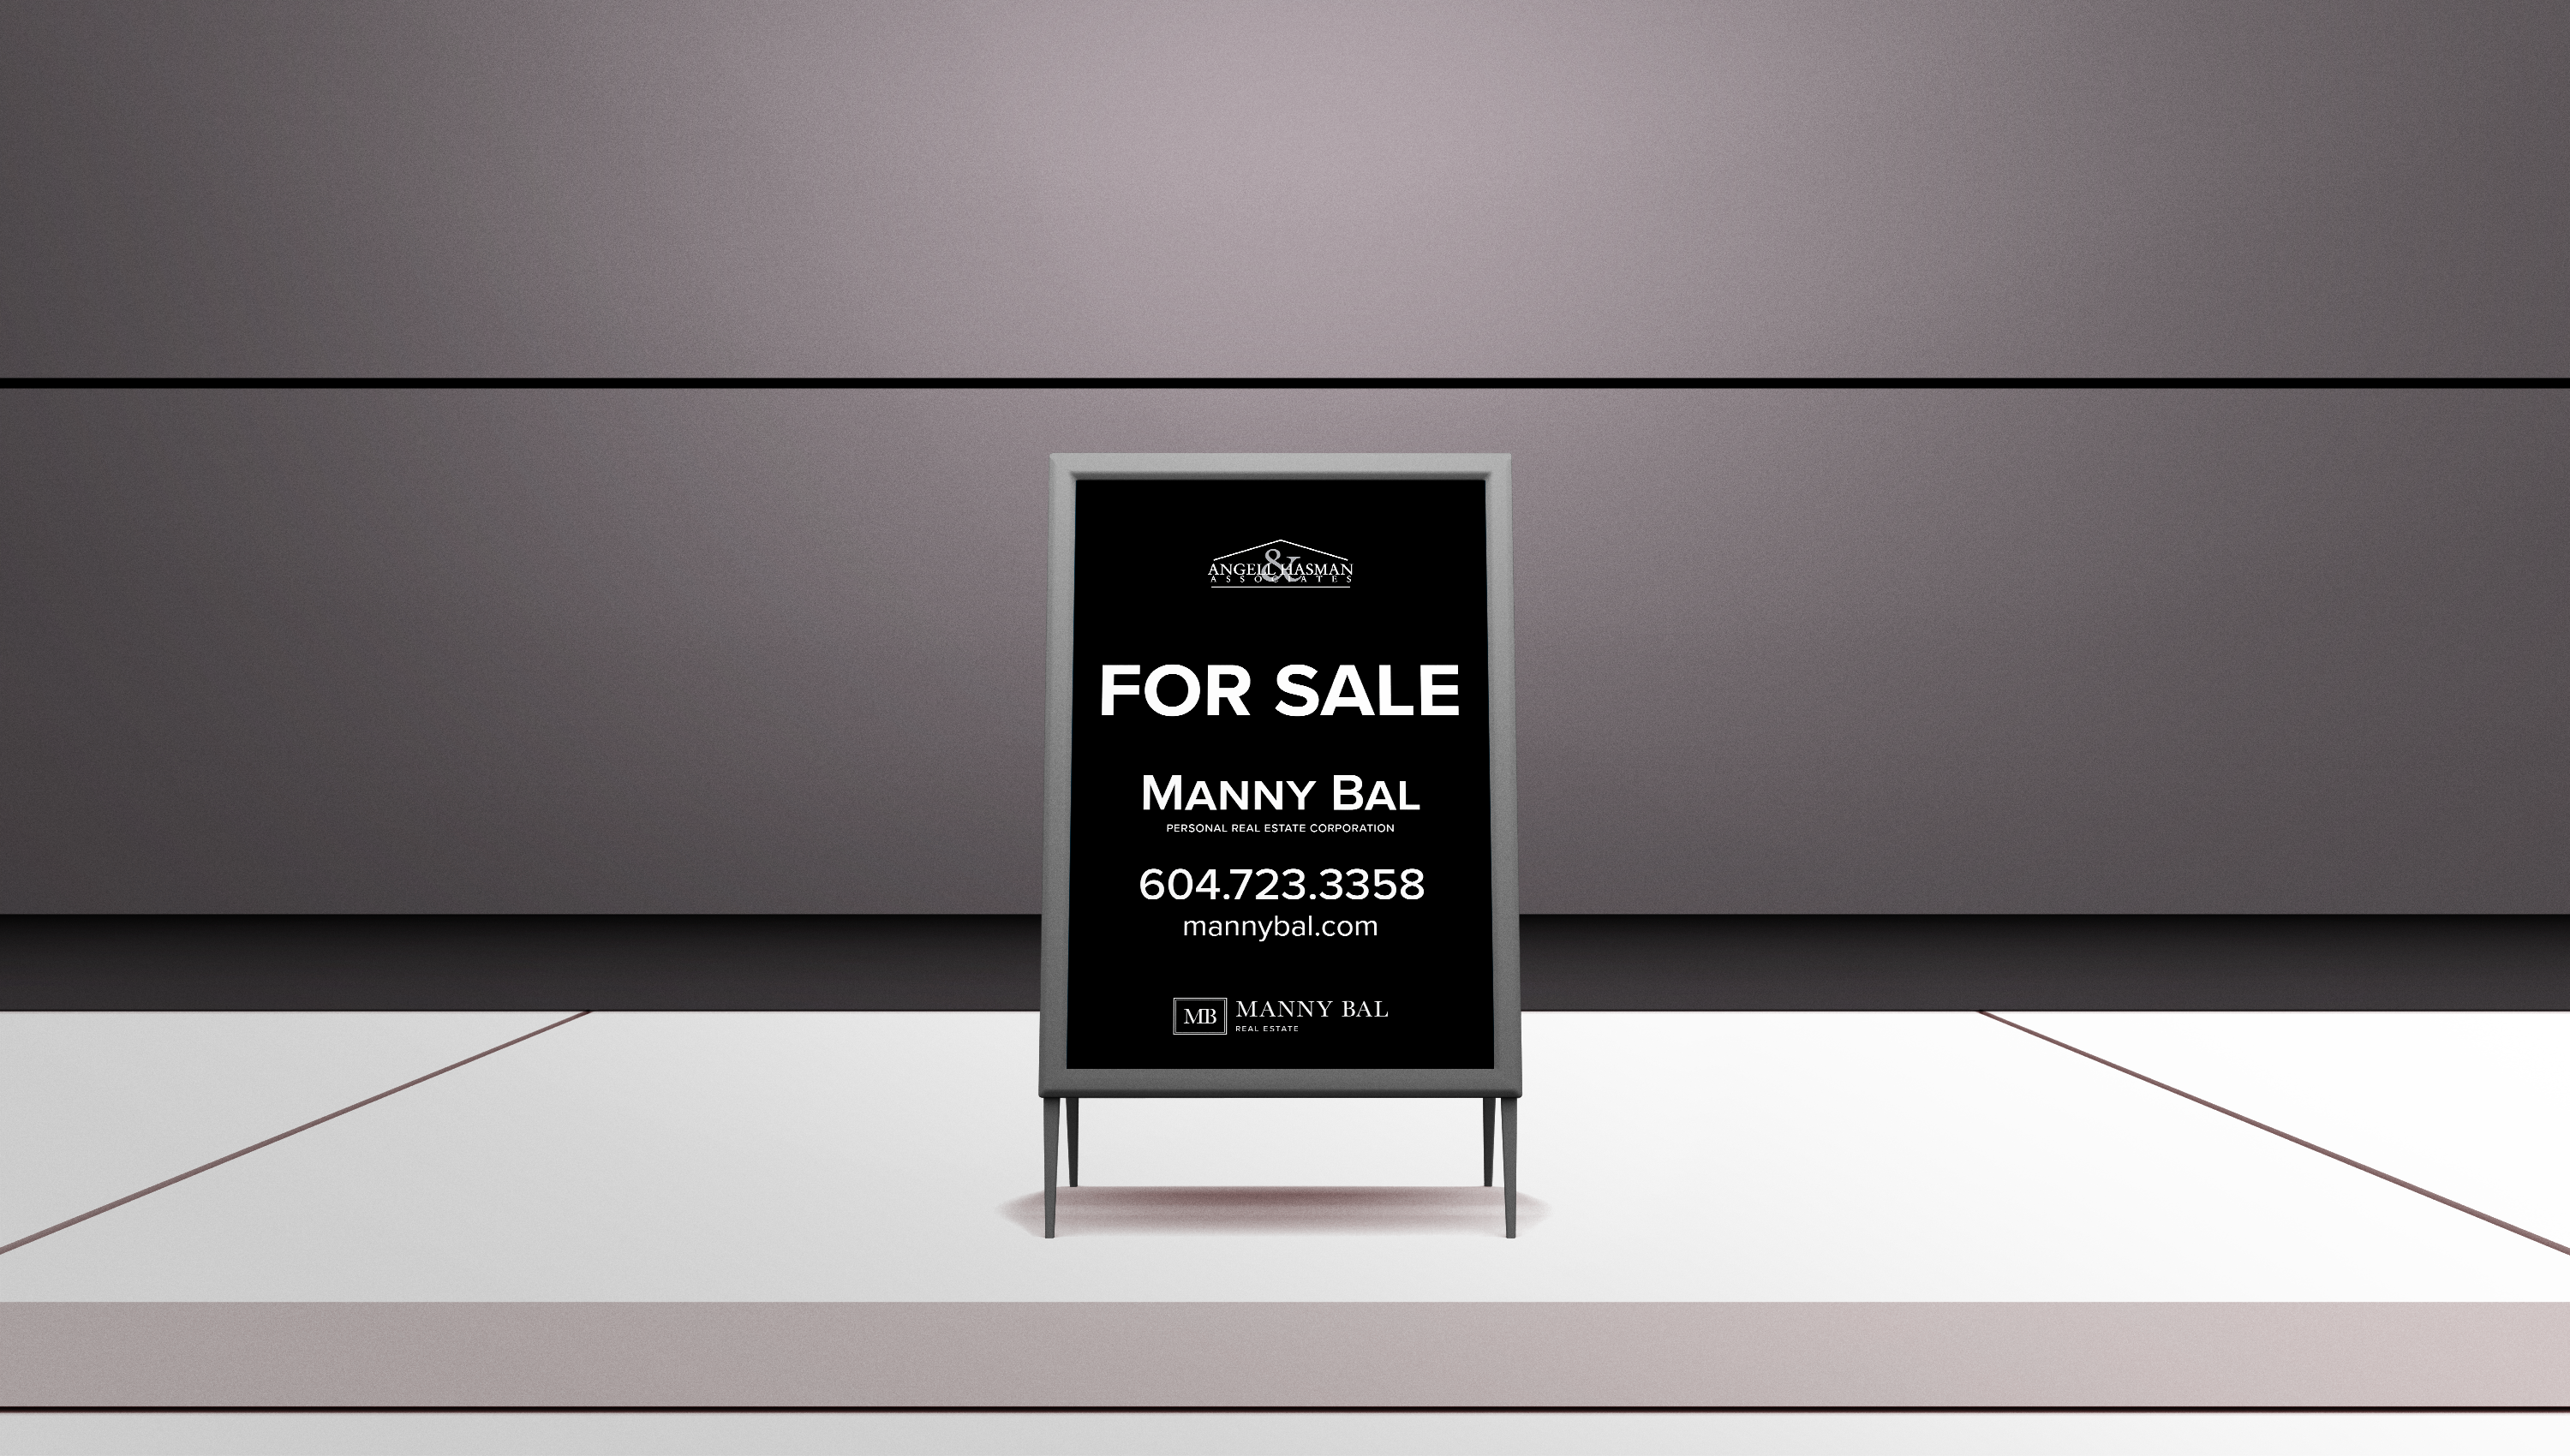 Mockup of Manny Bal's For Sale signs in a foldable sandwich board